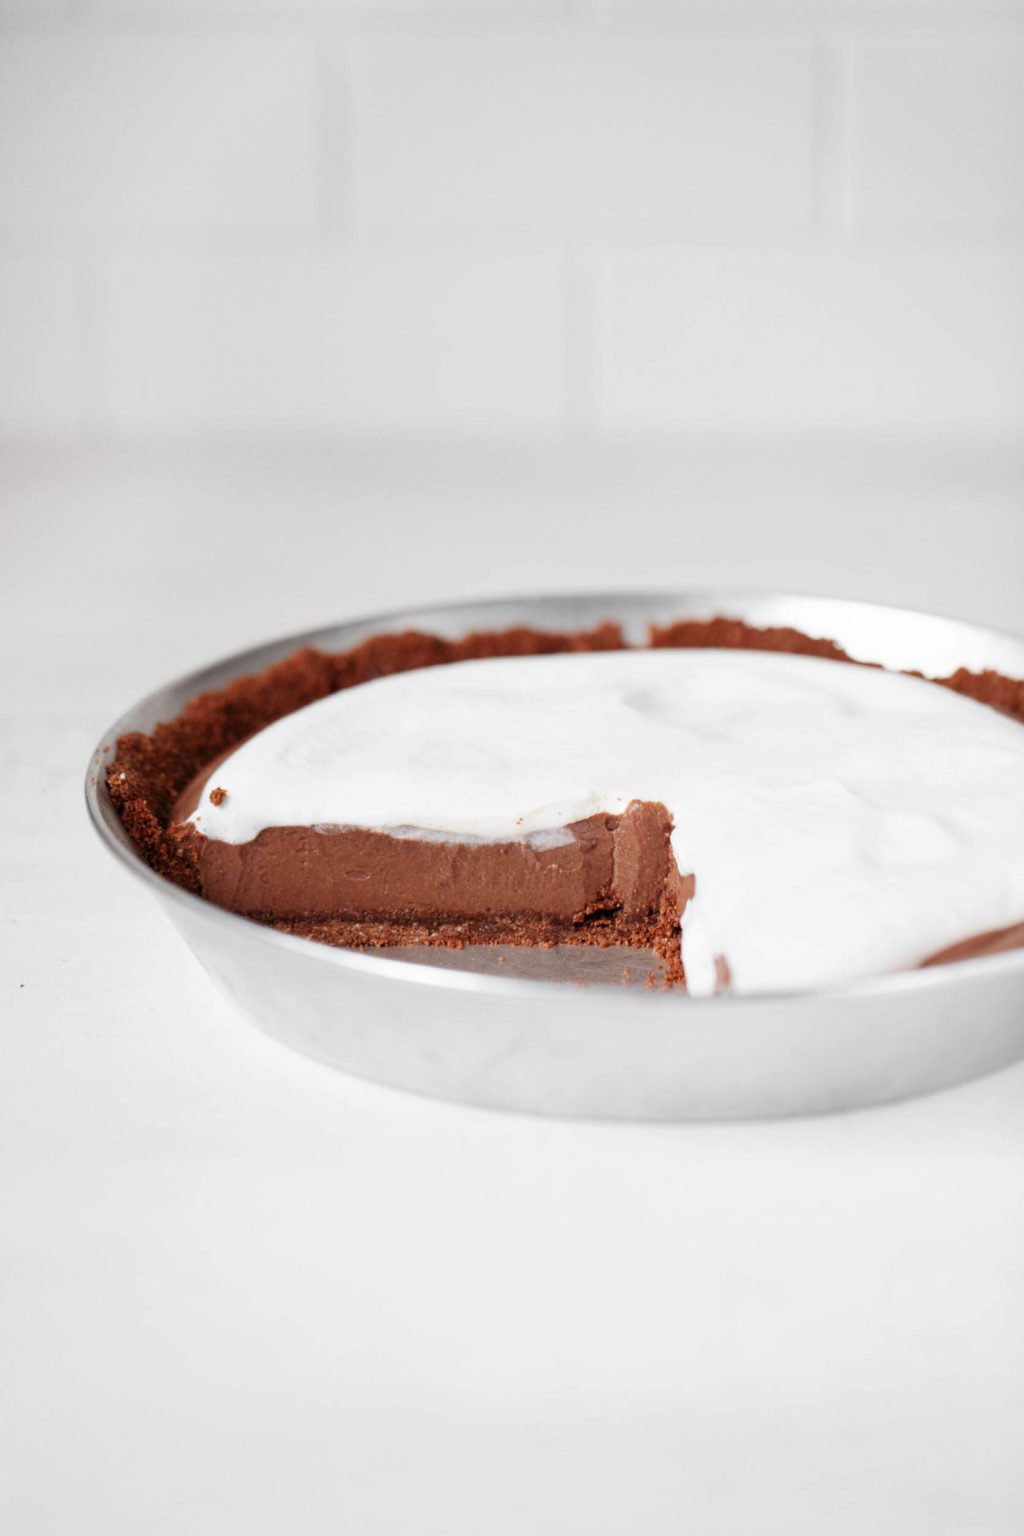 A vegan chocolate mousse pie is held in a silver pie plate. It rests on a white surface.